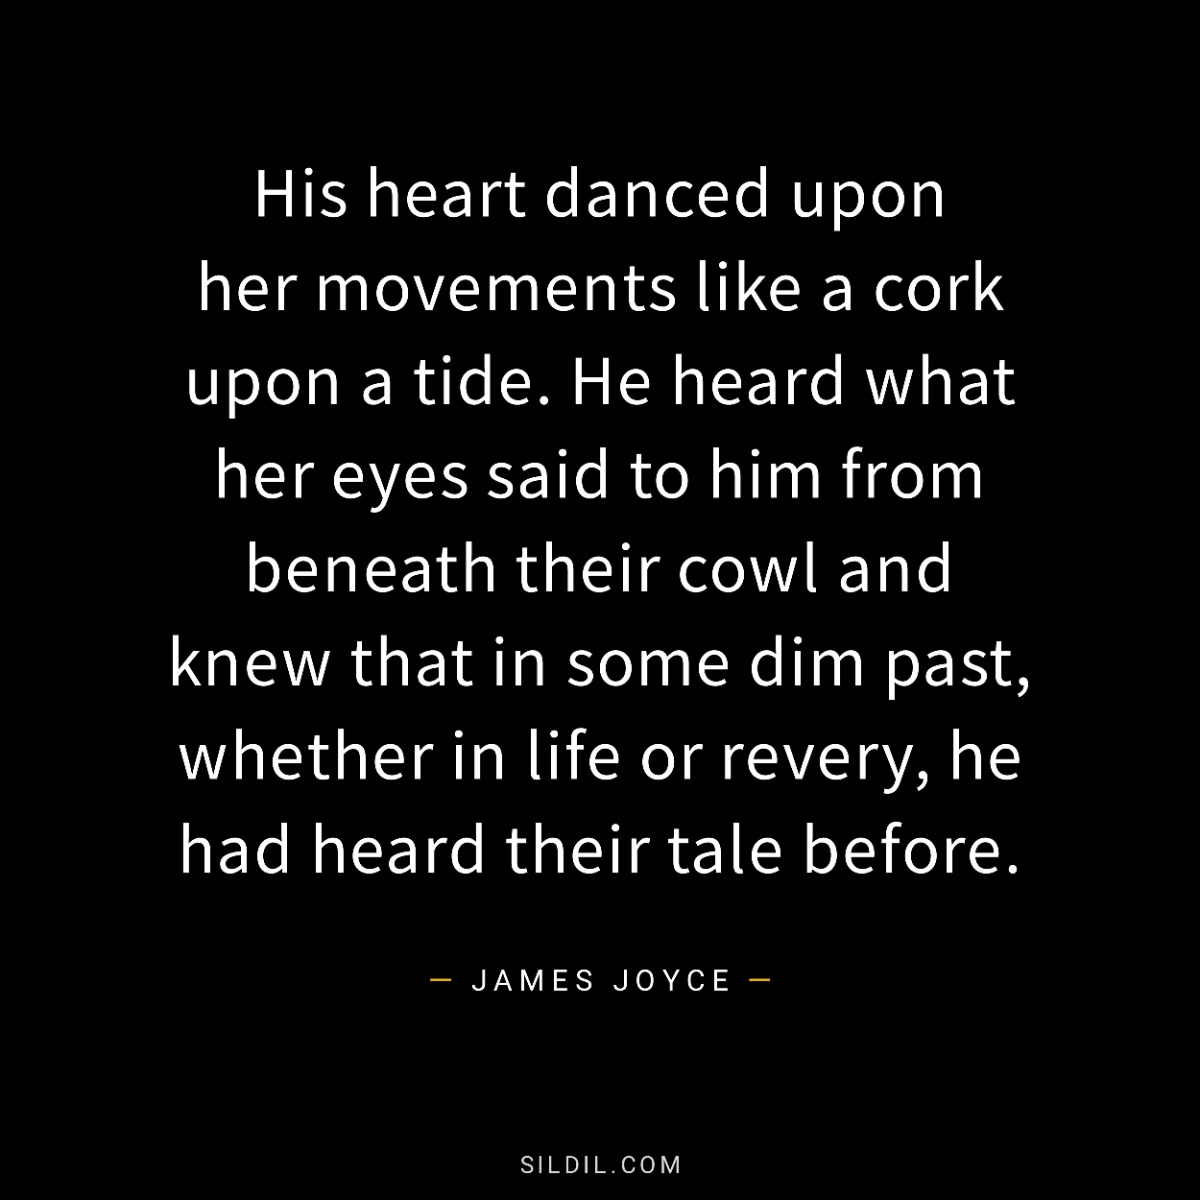 His heart danced upon her movements like a cork upon a tide. He heard what her eyes said to him from beneath their cowl and knew that in some dim past, whether in life or revery, he had heard their tale before.